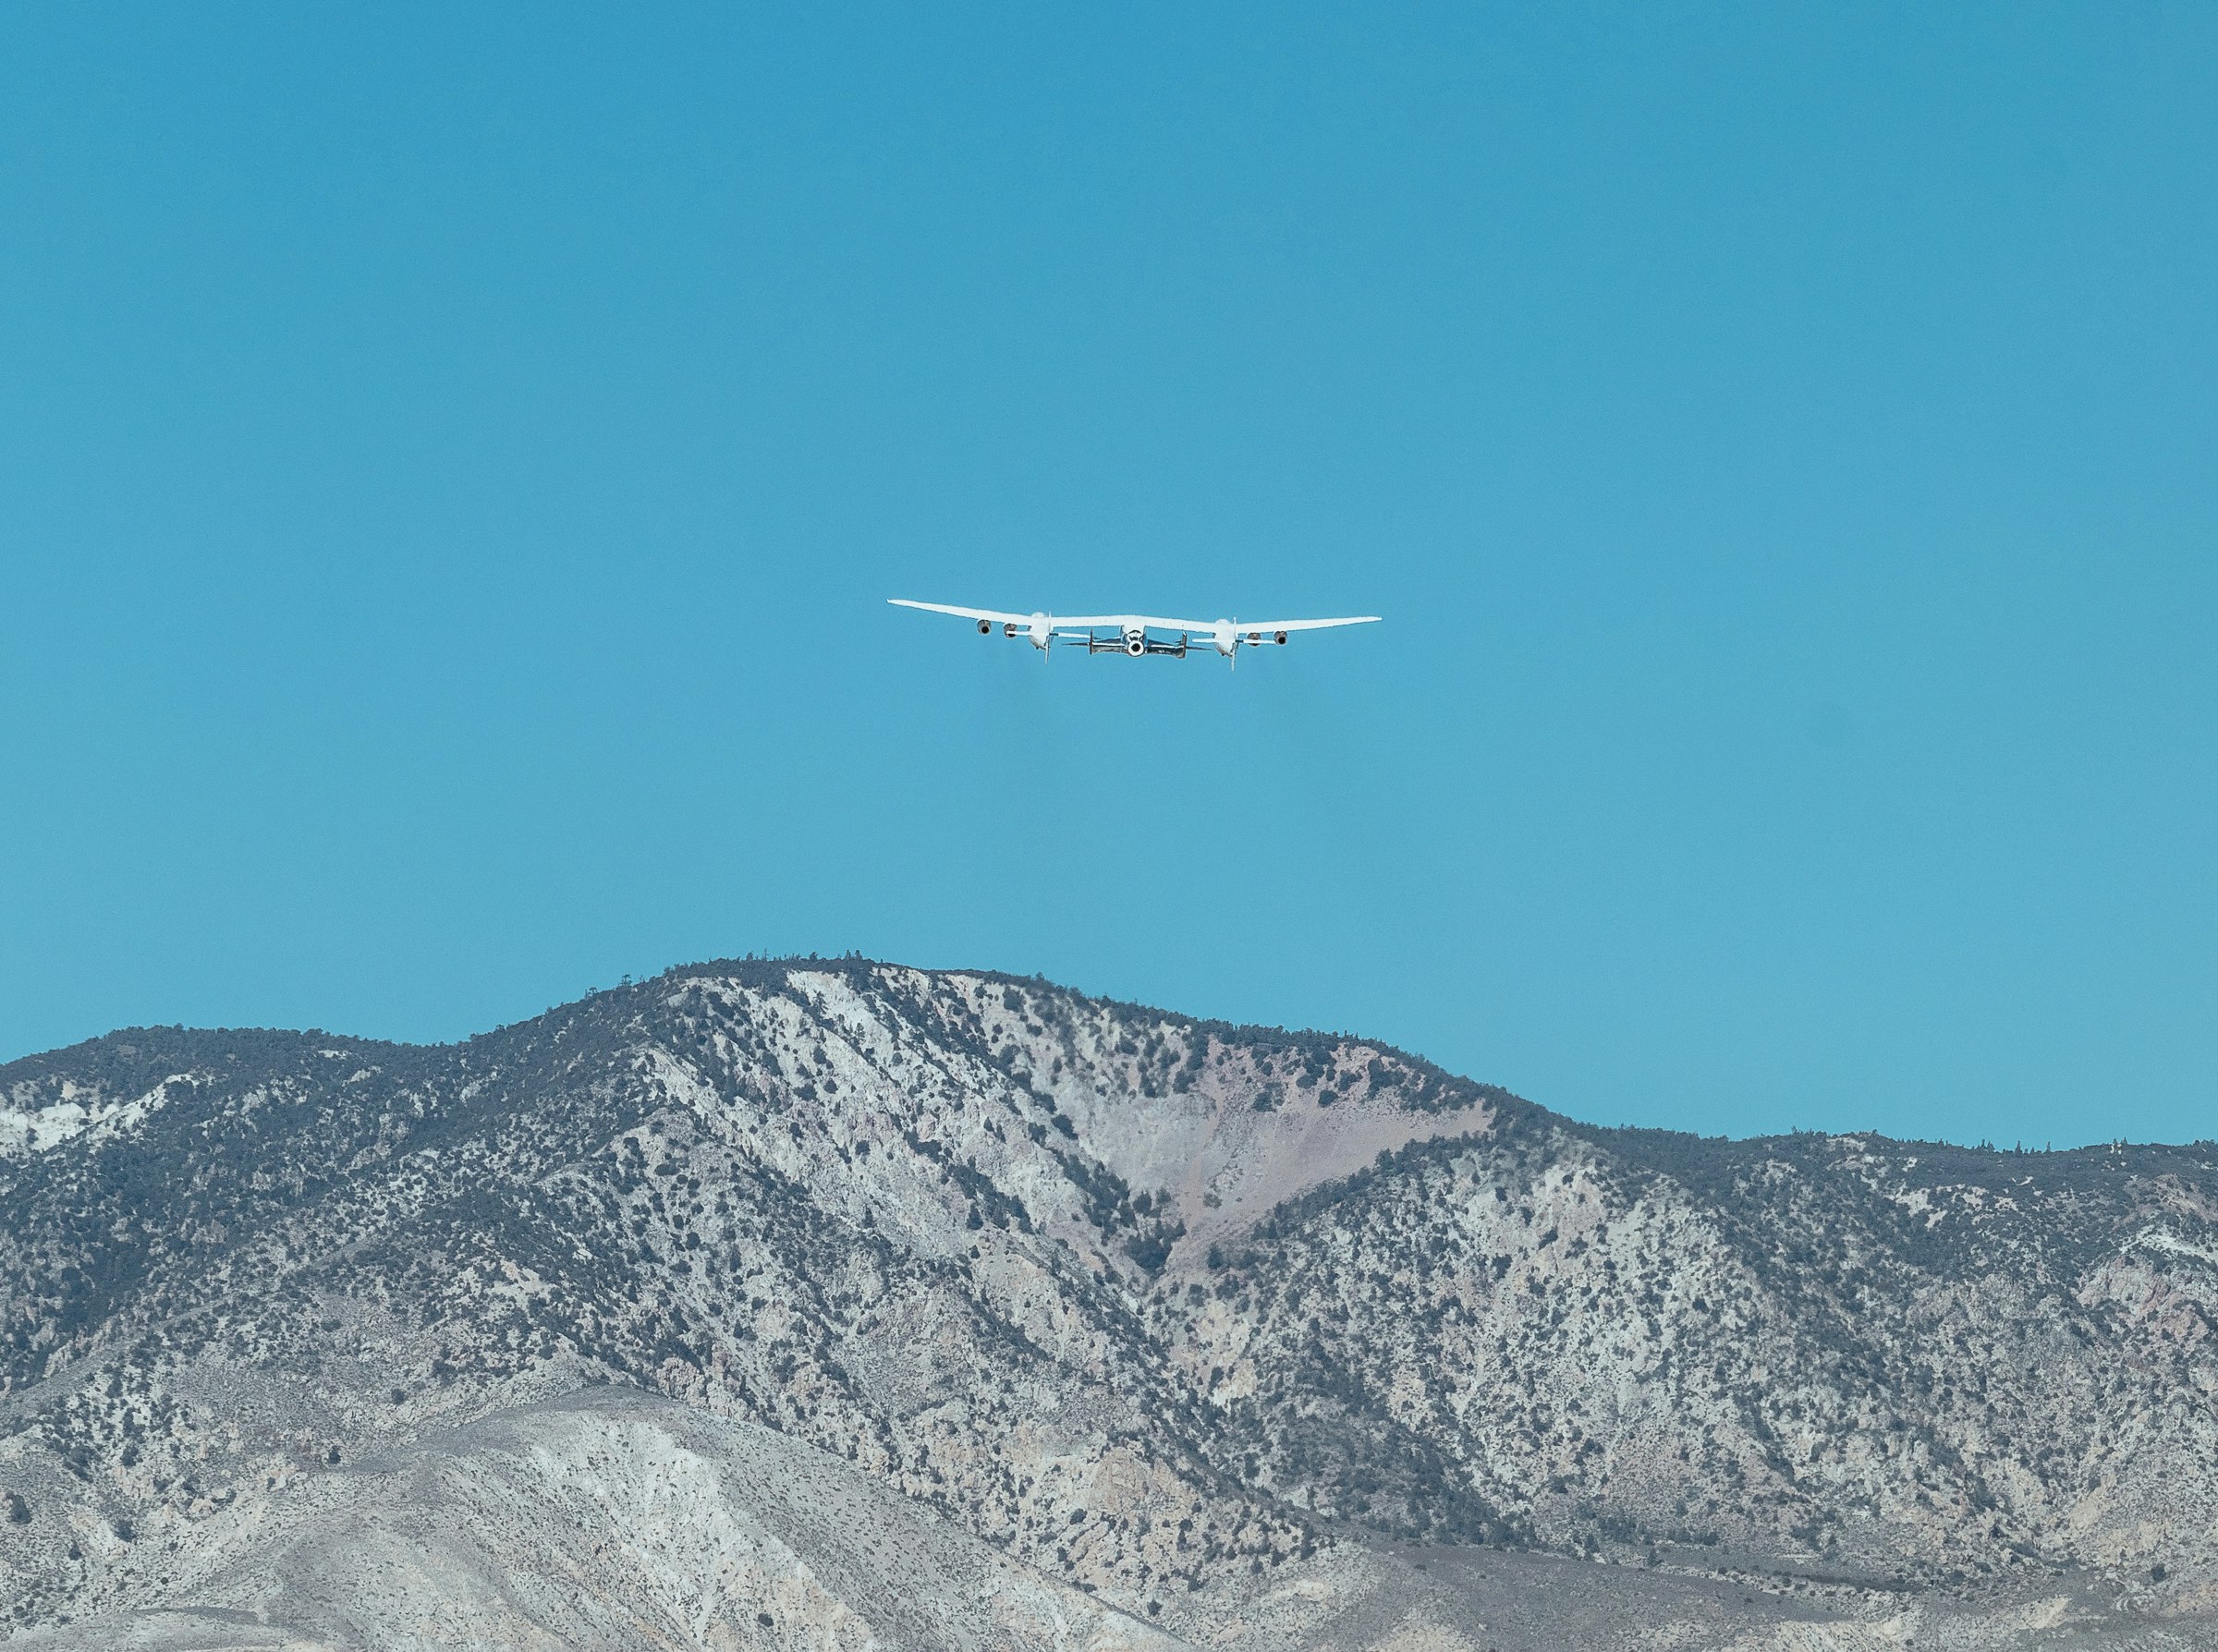 SpaceShipTwo Unity and VMS Eve take off from Mojave, CA and head towards Virgin Galactic's Gateway to Space, Spaceport America, New Mexico.